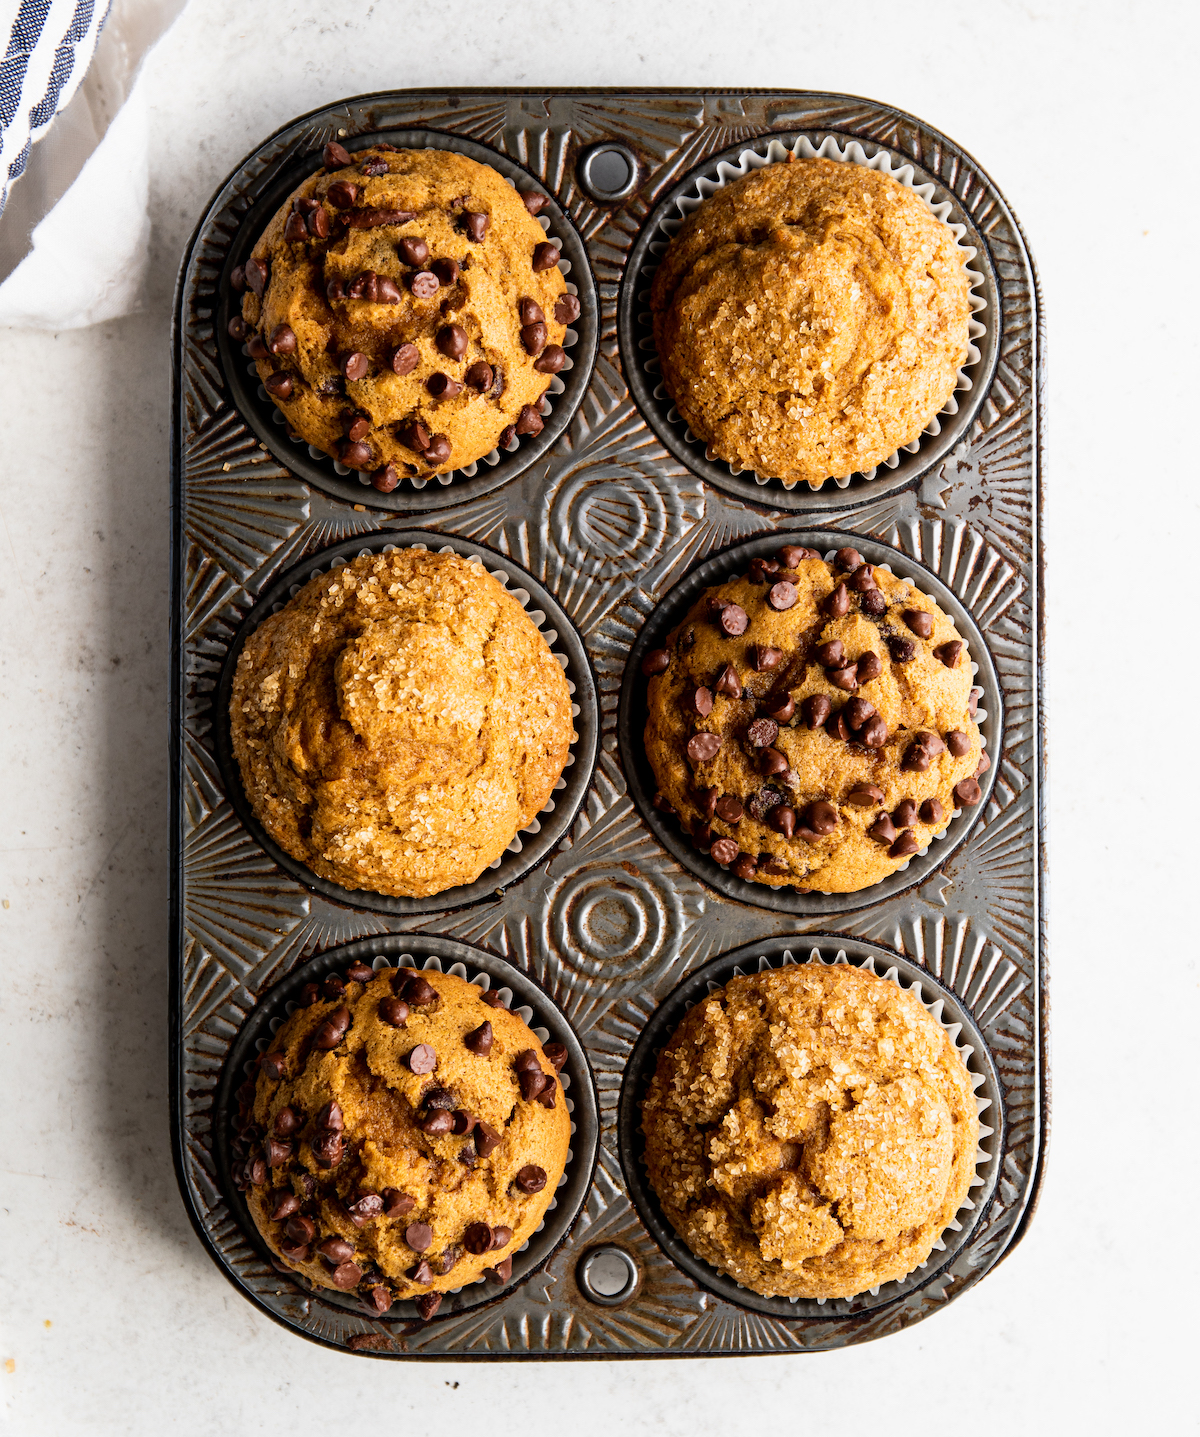 Pumpkin muffins in a tin on a white surface.